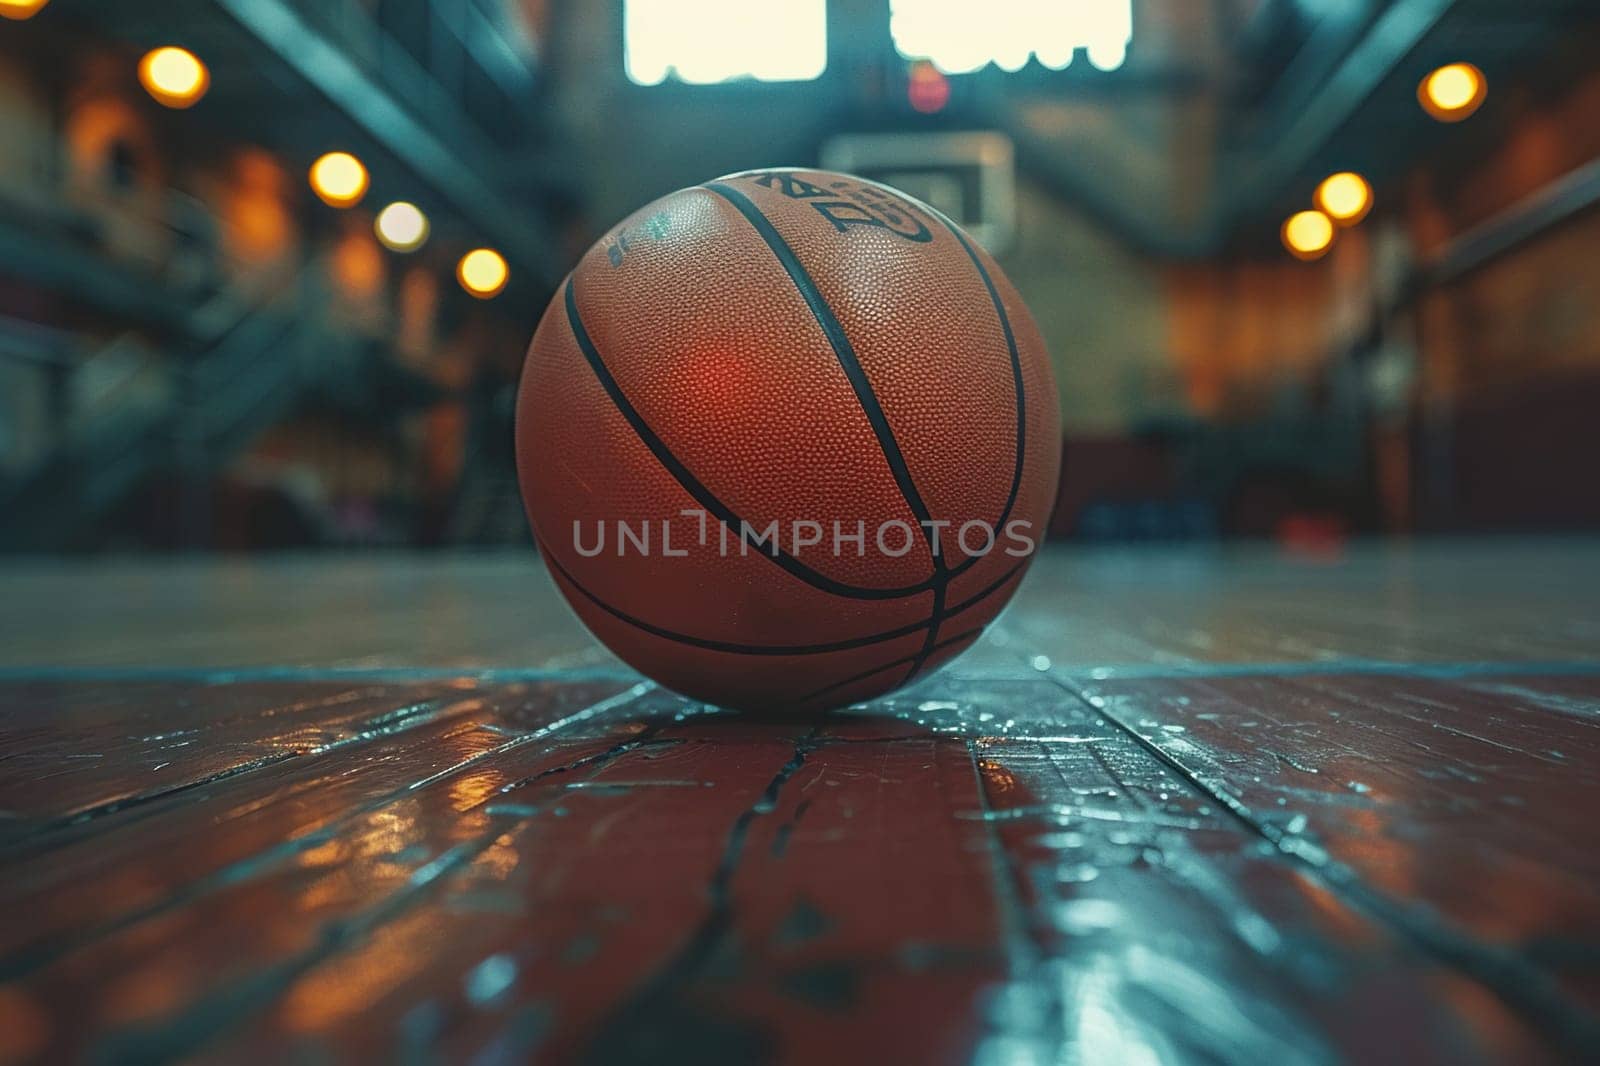 Close-up of a basketball on a wooden floor. Vintage style. Hobbies and recreation.